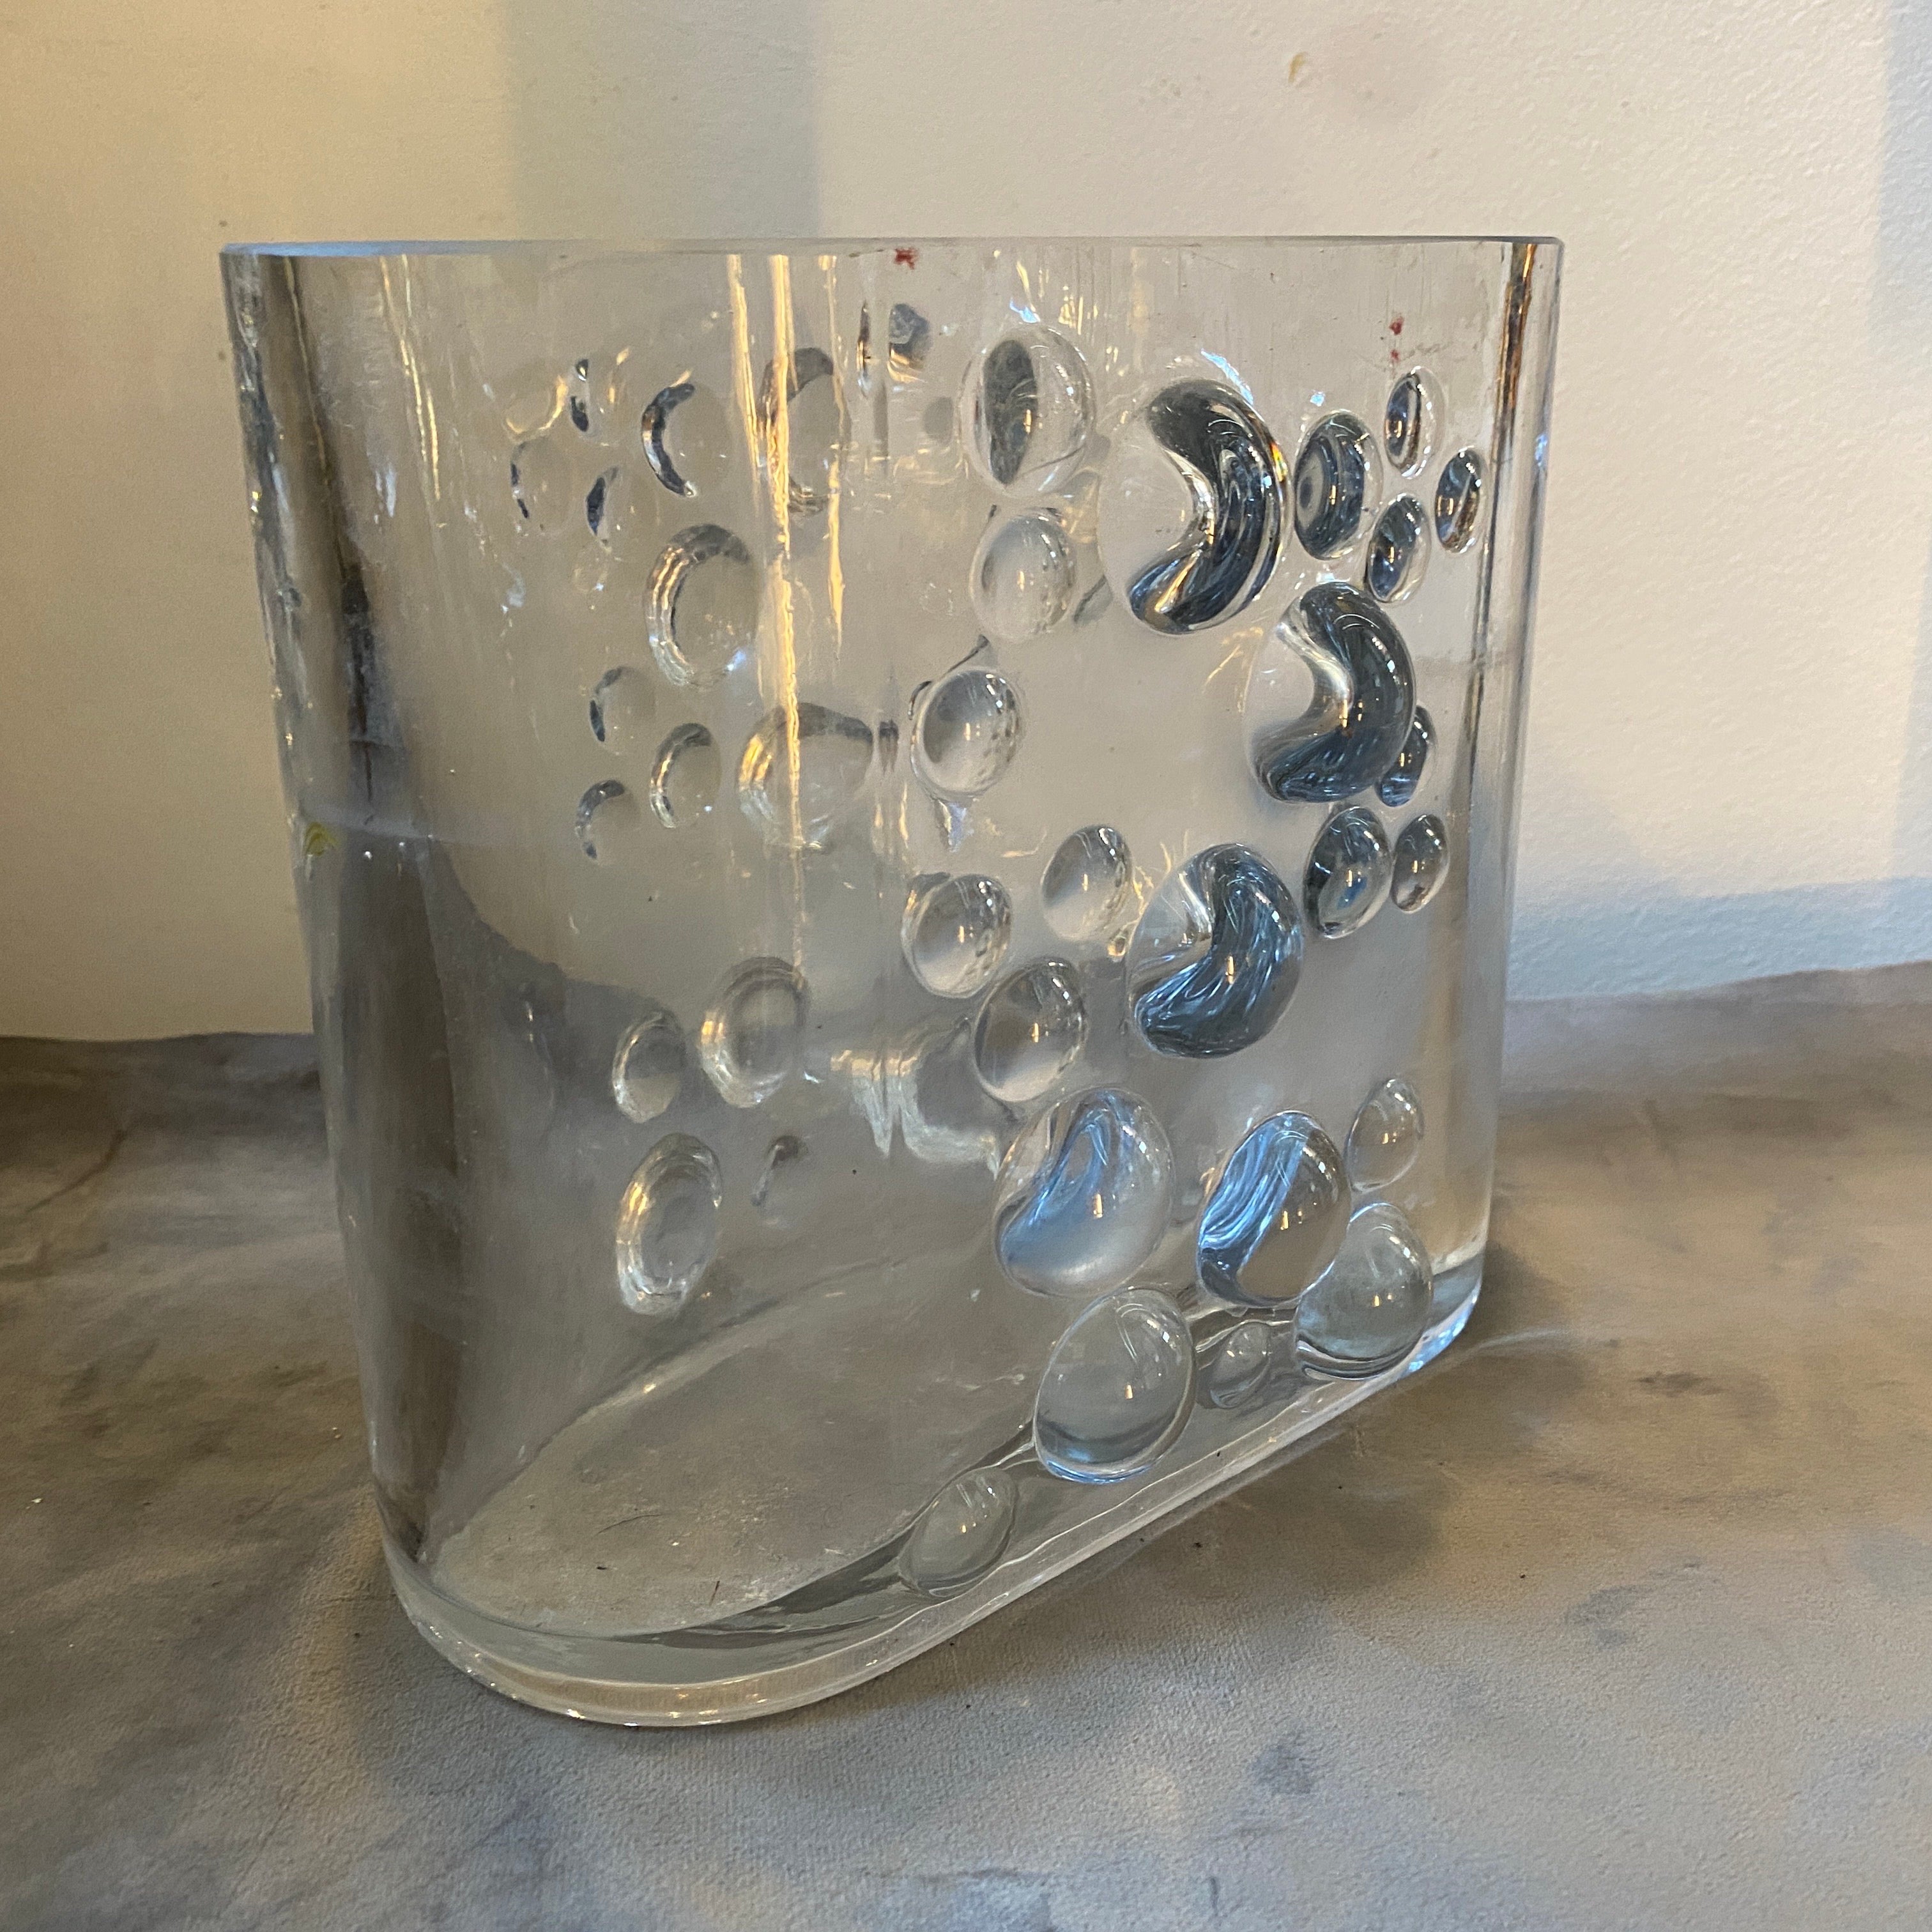 A space age oval heavy glass vase designed and manufactured in Italy in the Seventies in Empoli, small town in Tuscany famous for high quality crystal production. The vase it's in perfect conditions. This Italian Oval Bubble Vase is a captivating